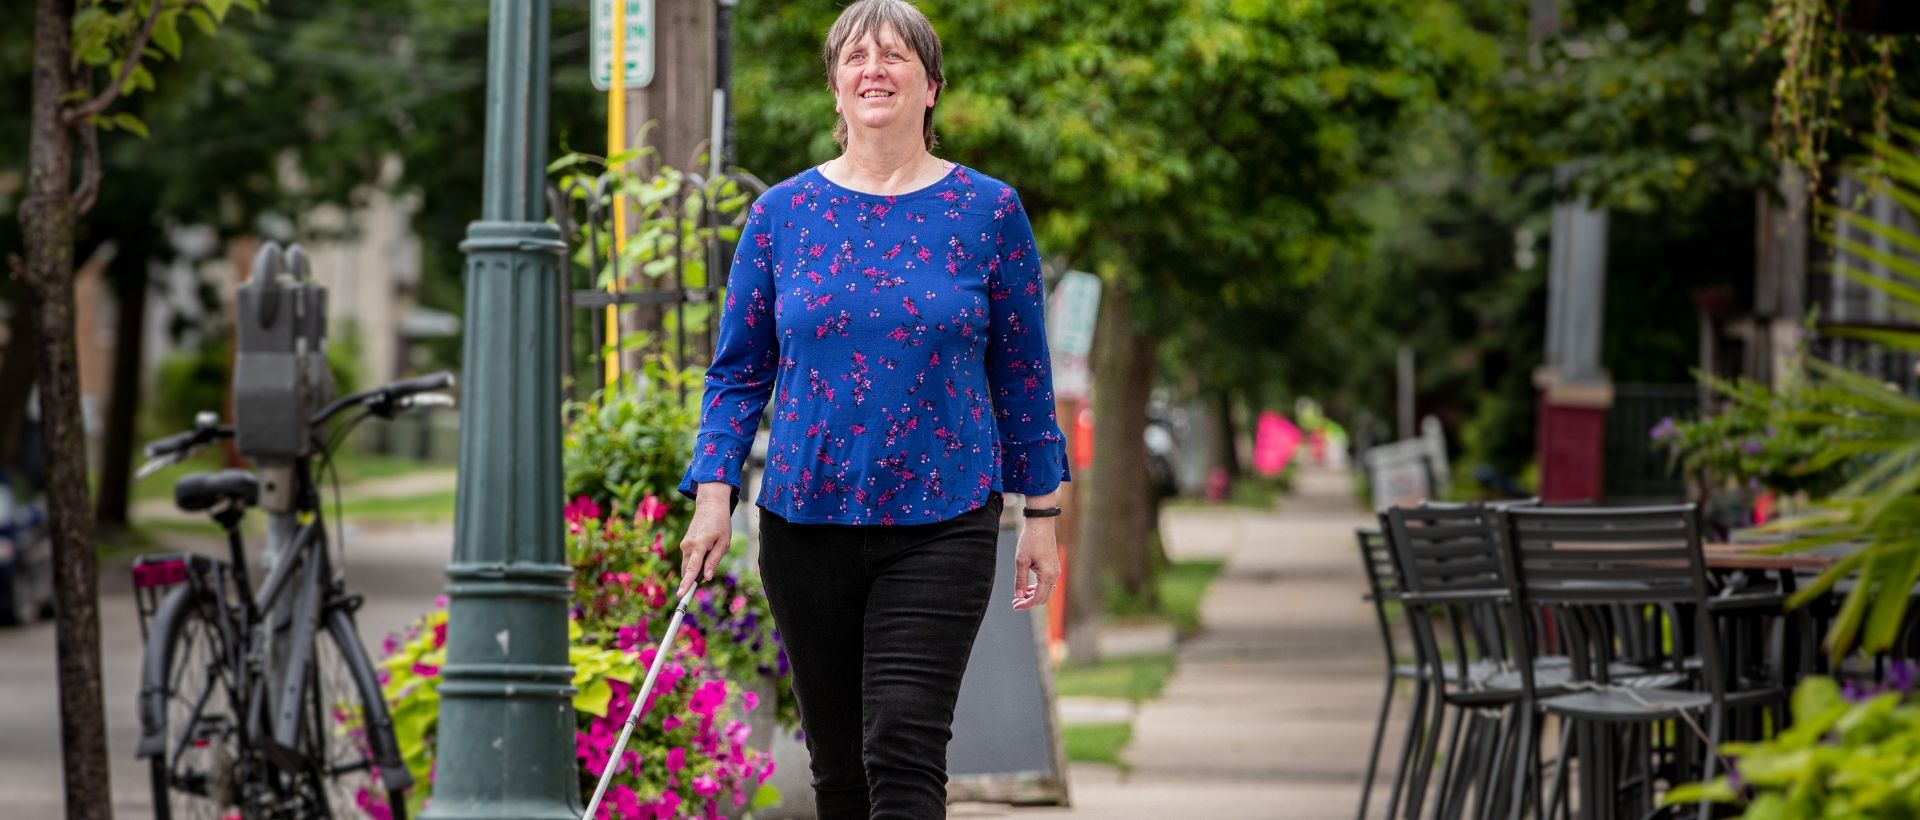 Woman walking down a city street with a cane